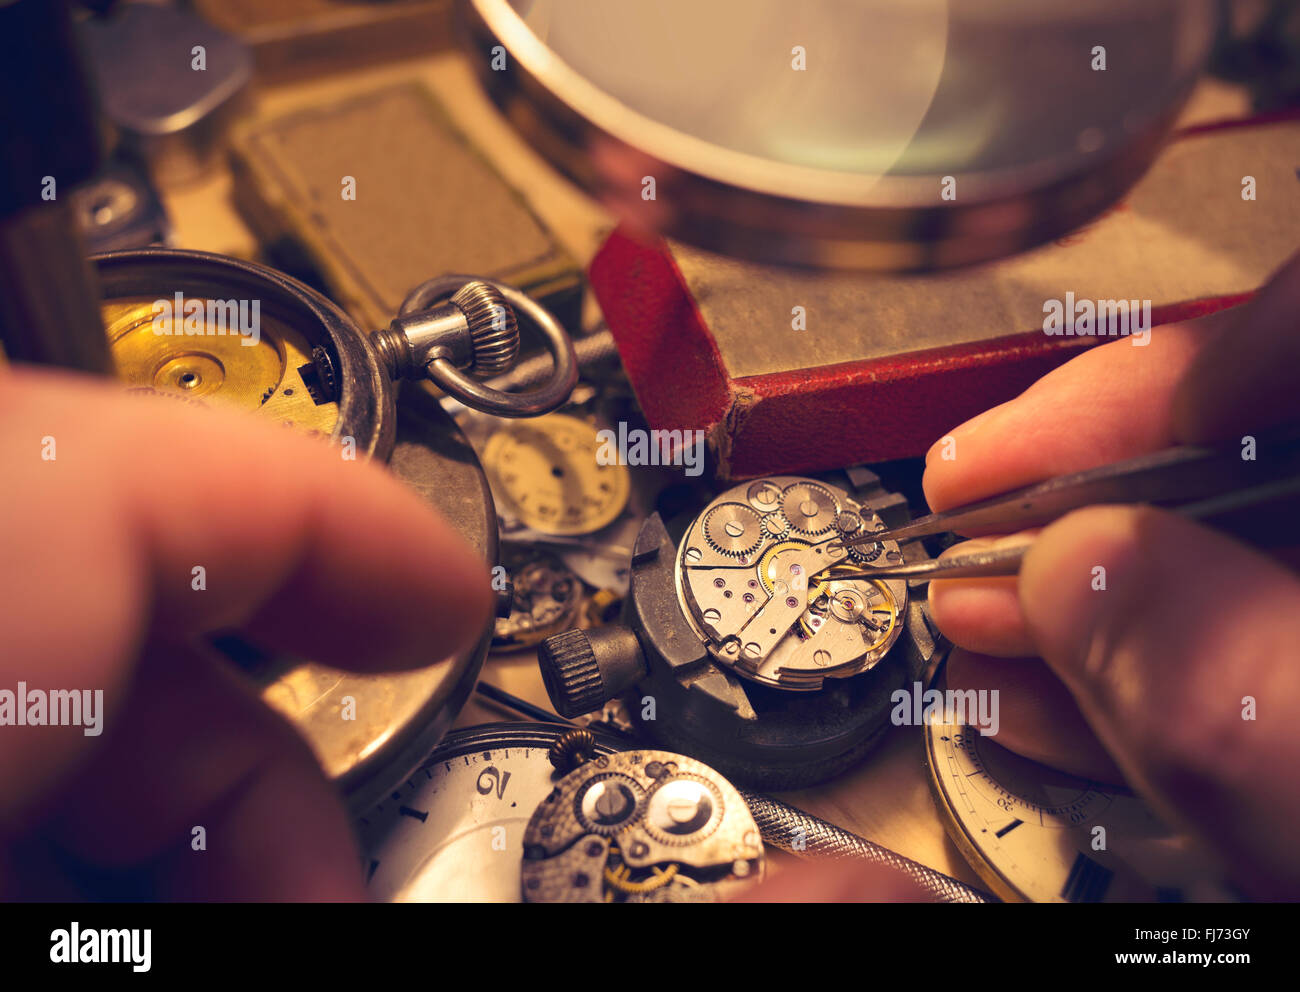 Watchmakers Craftmanship. A watch maker repairing a vintage automatic watch. Stock Photo